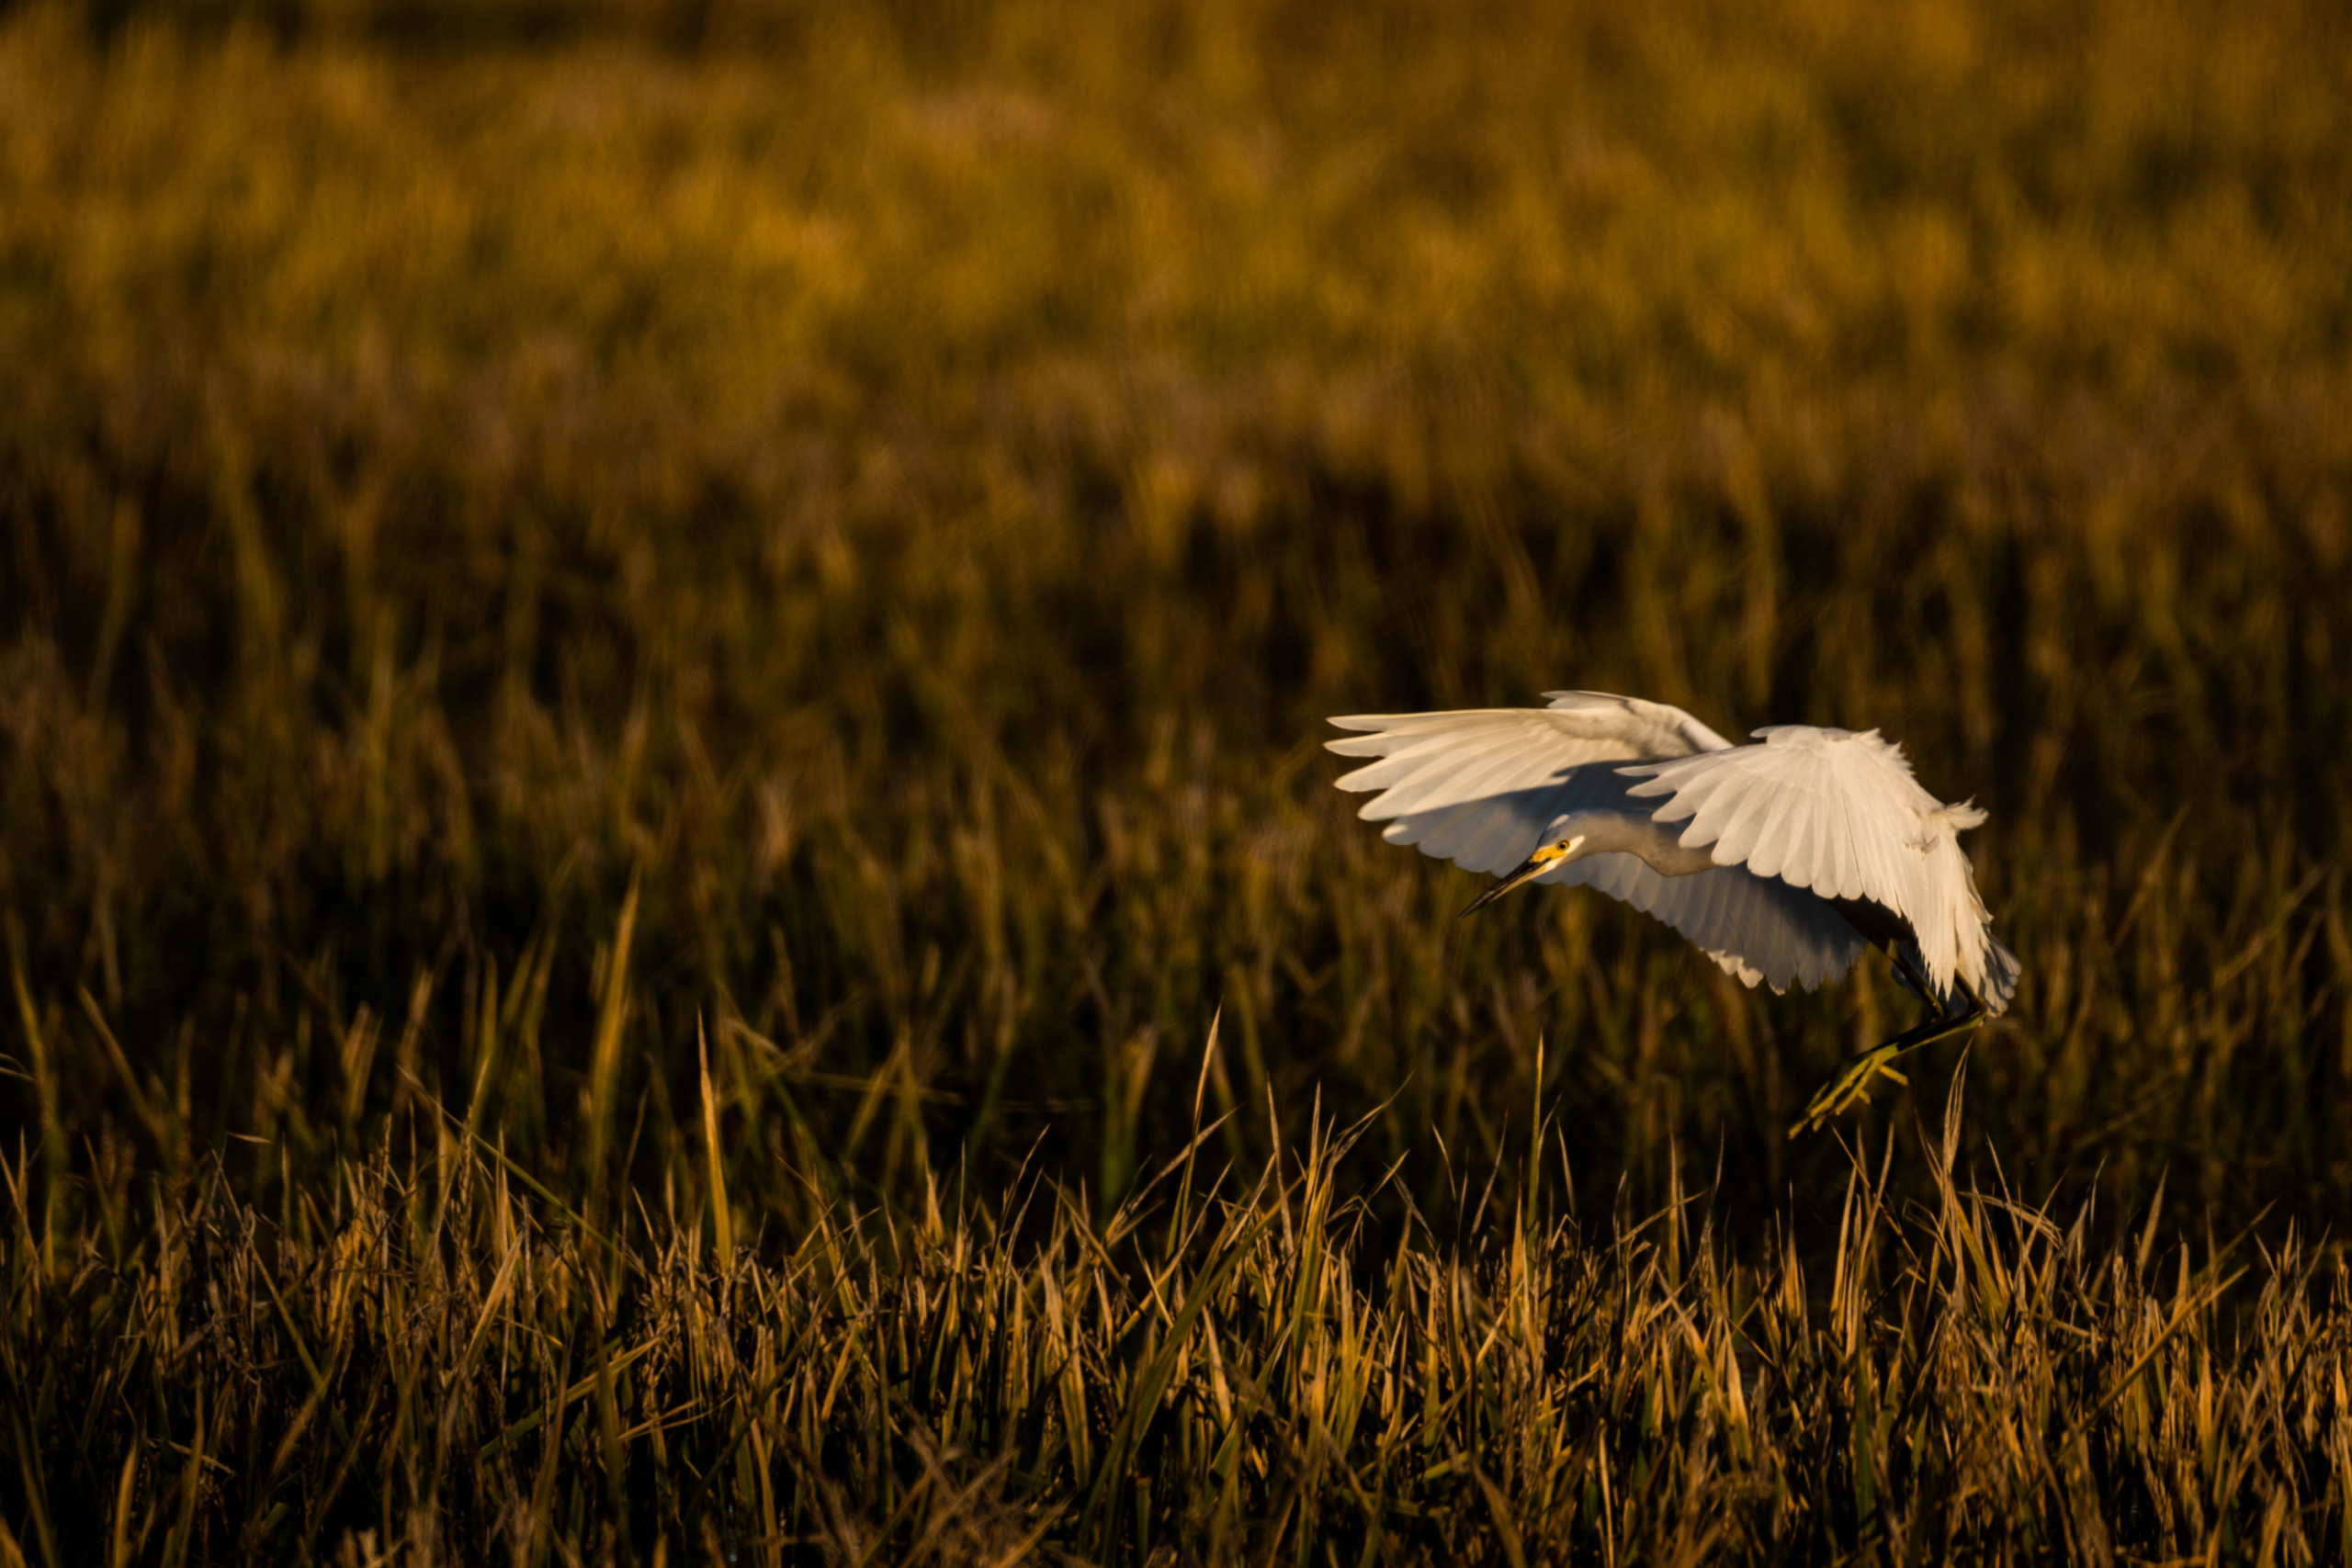 A snowy egret in flight over flooded rice fields